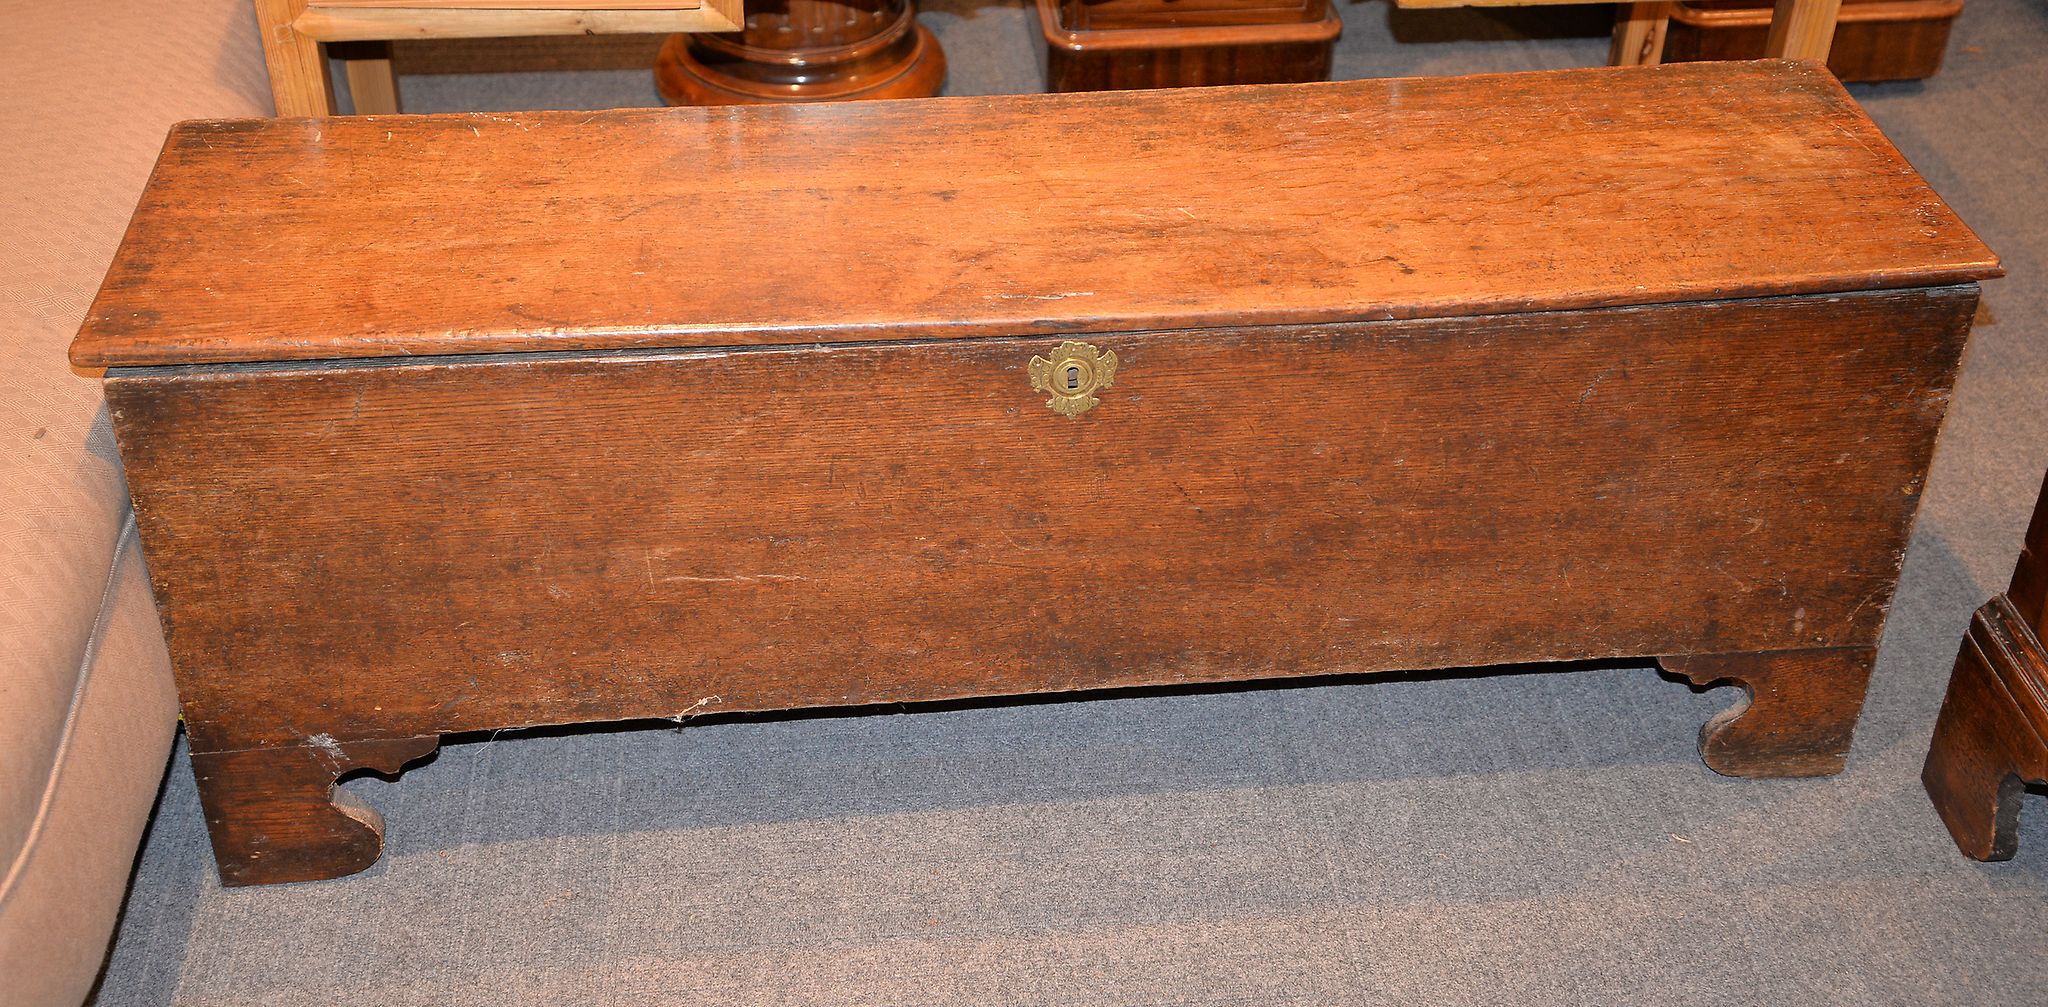 An oak blanket box in 17th century style, possibly incorporating some period elements, 46cm x